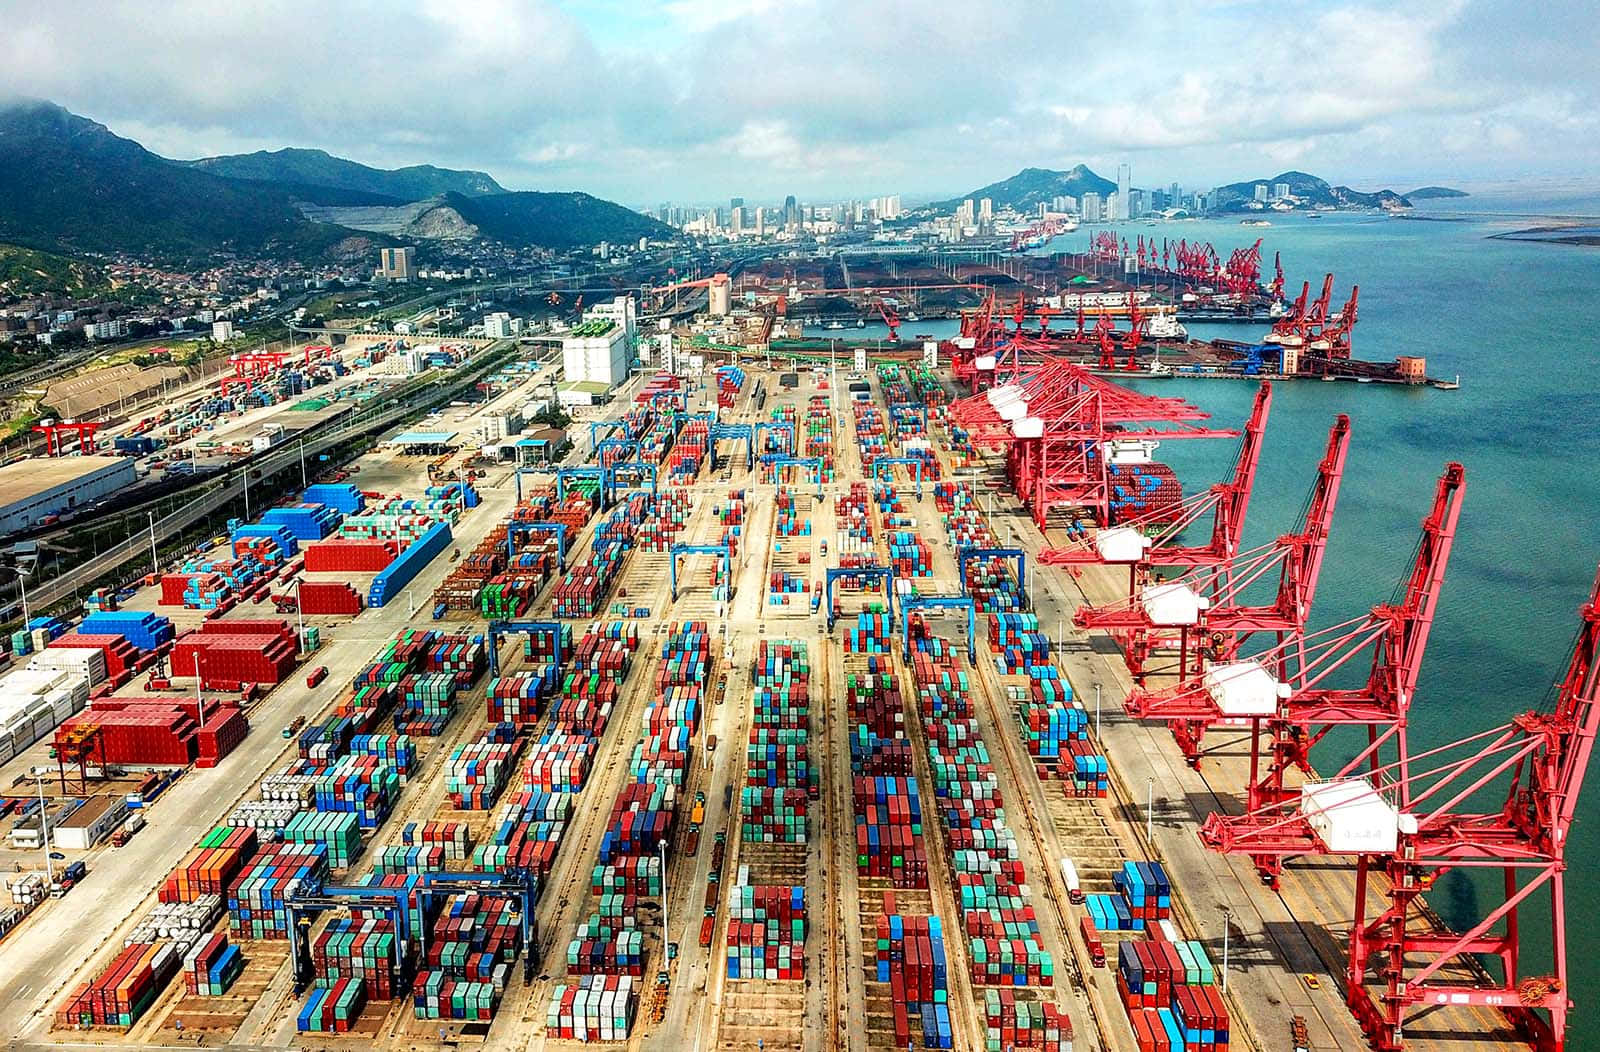 A Large Container Port With Many Containers